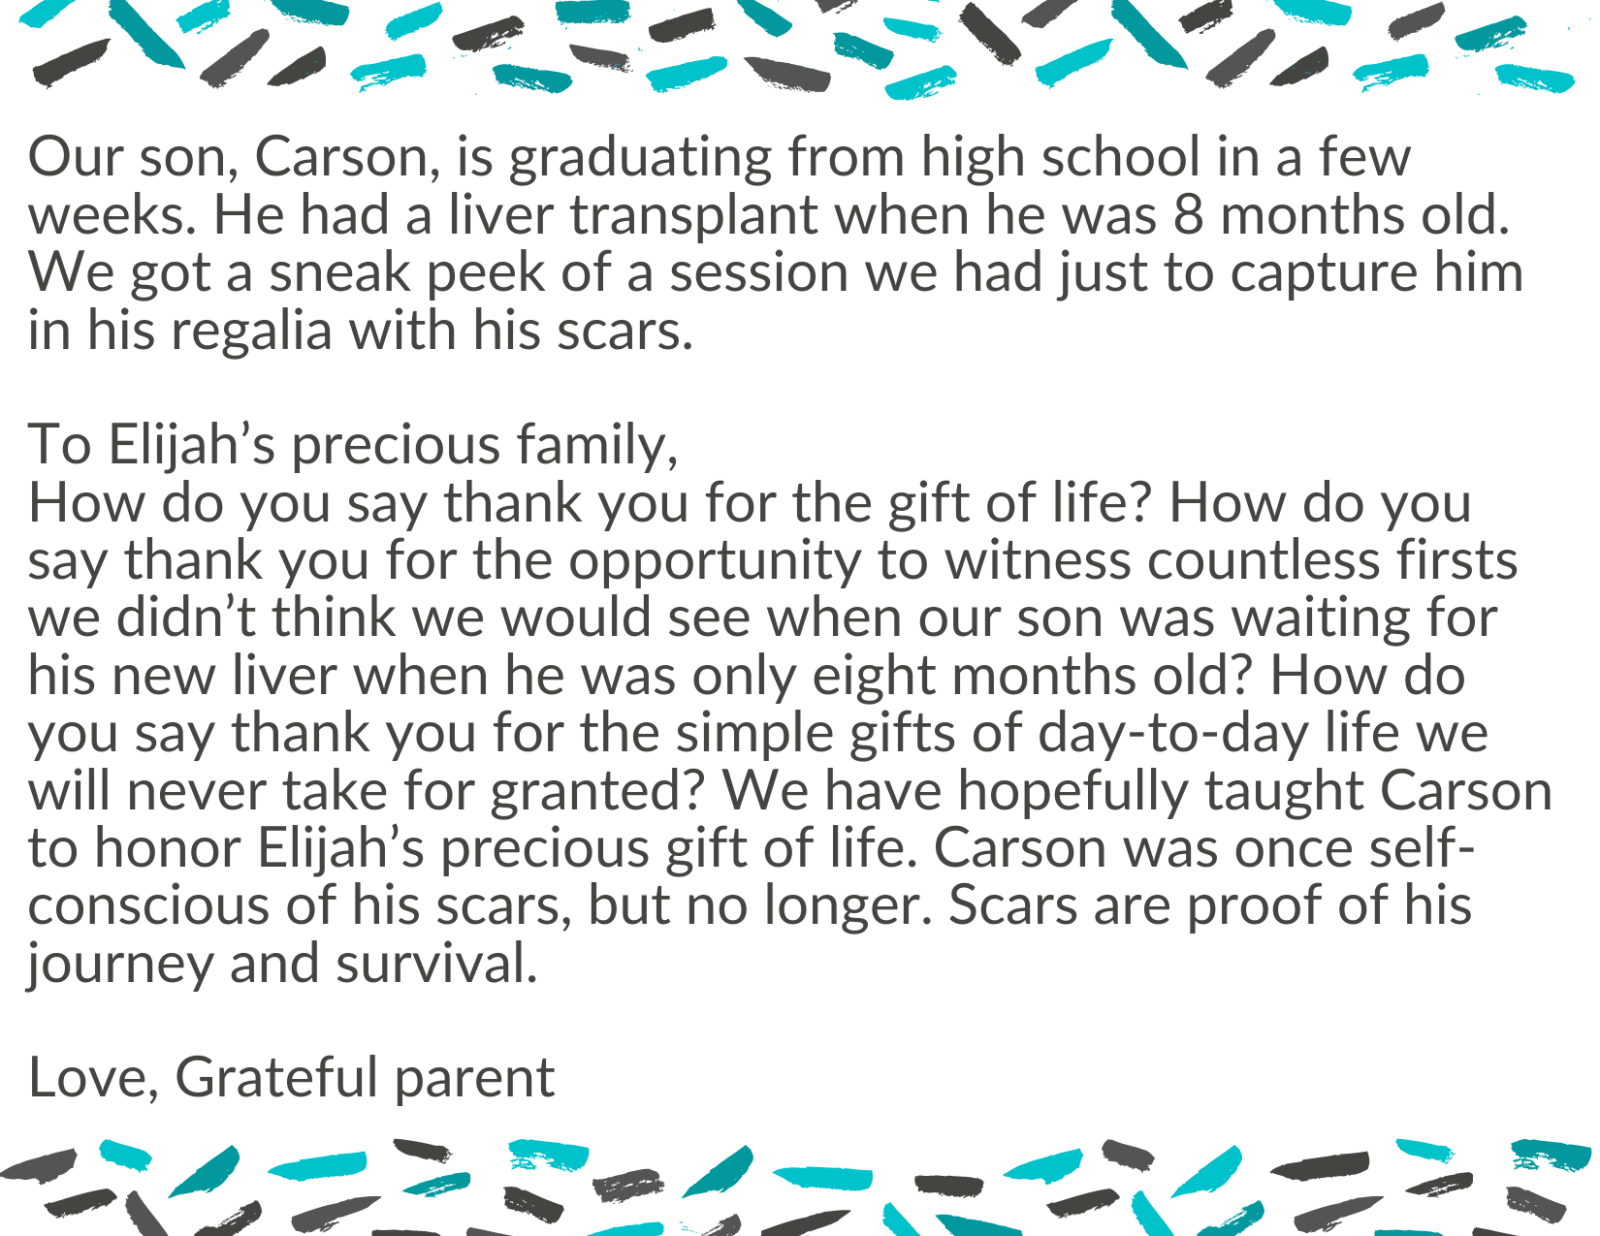 message from Carson's mother to Elijah's family